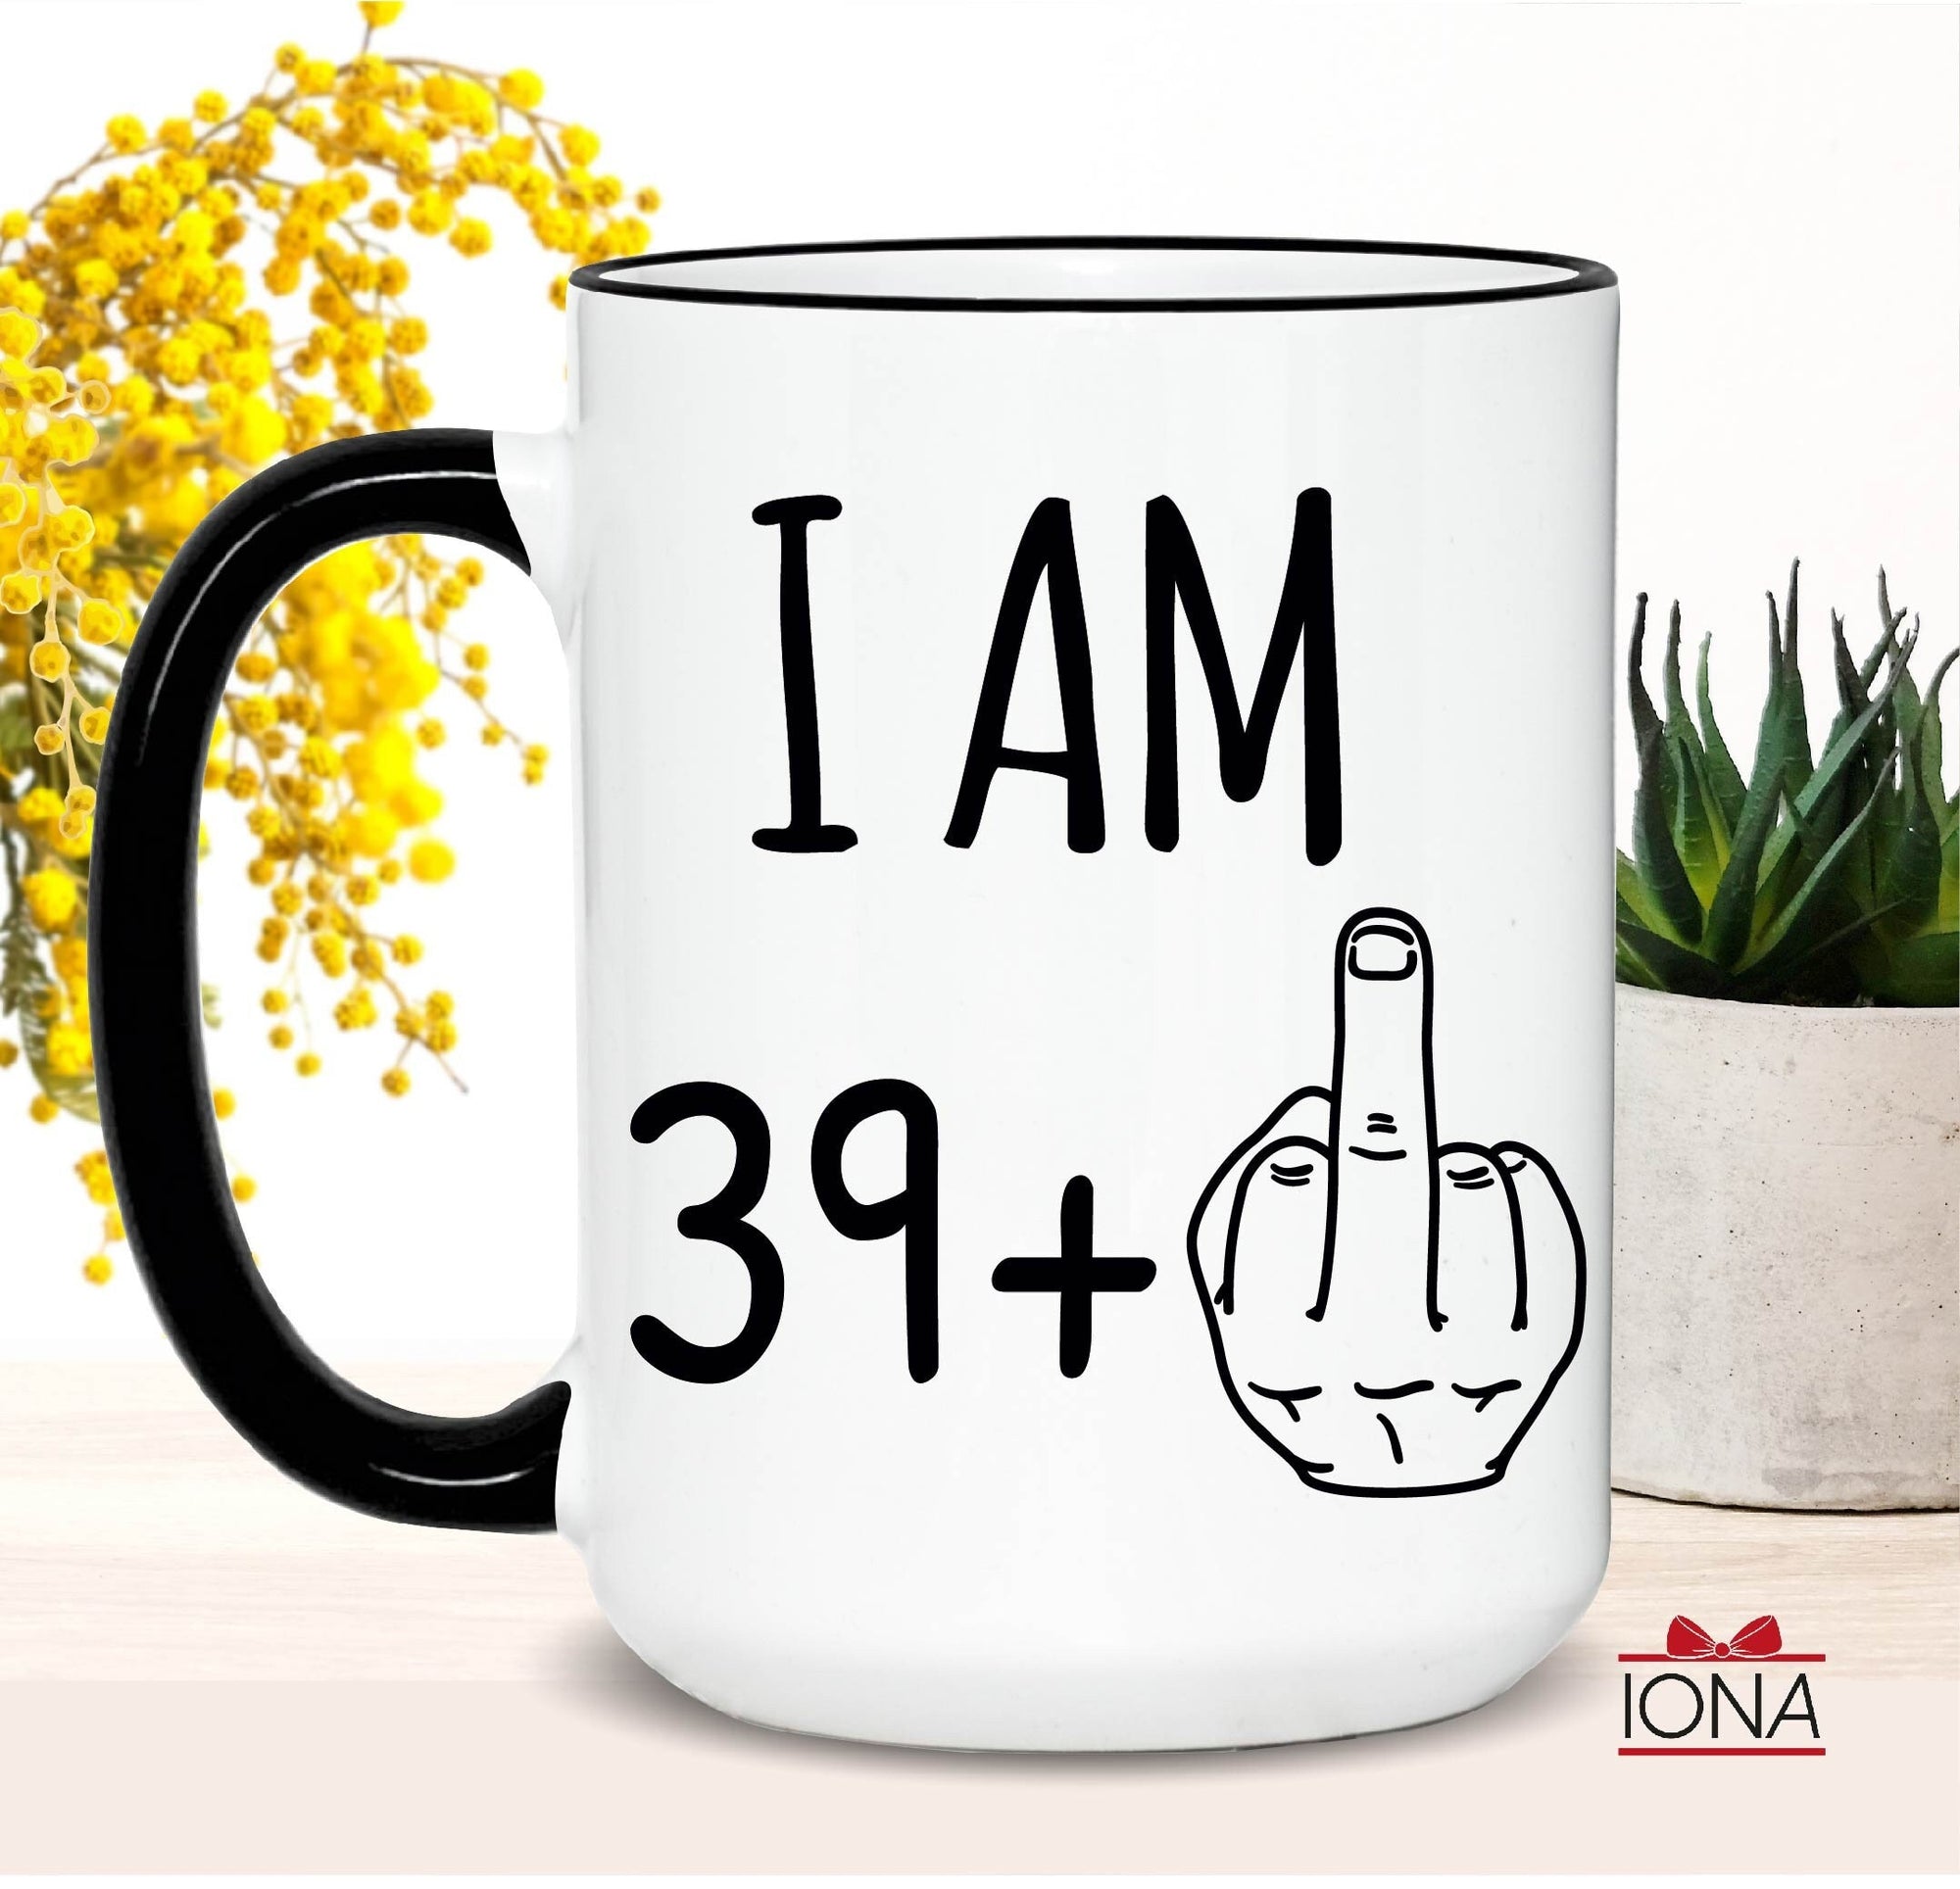 40th Birthday Gift, Personalized 40th Birthday Coffee Mug, Born in 1982, Making the world a better place since 1982, Best Friends 40th Gifts